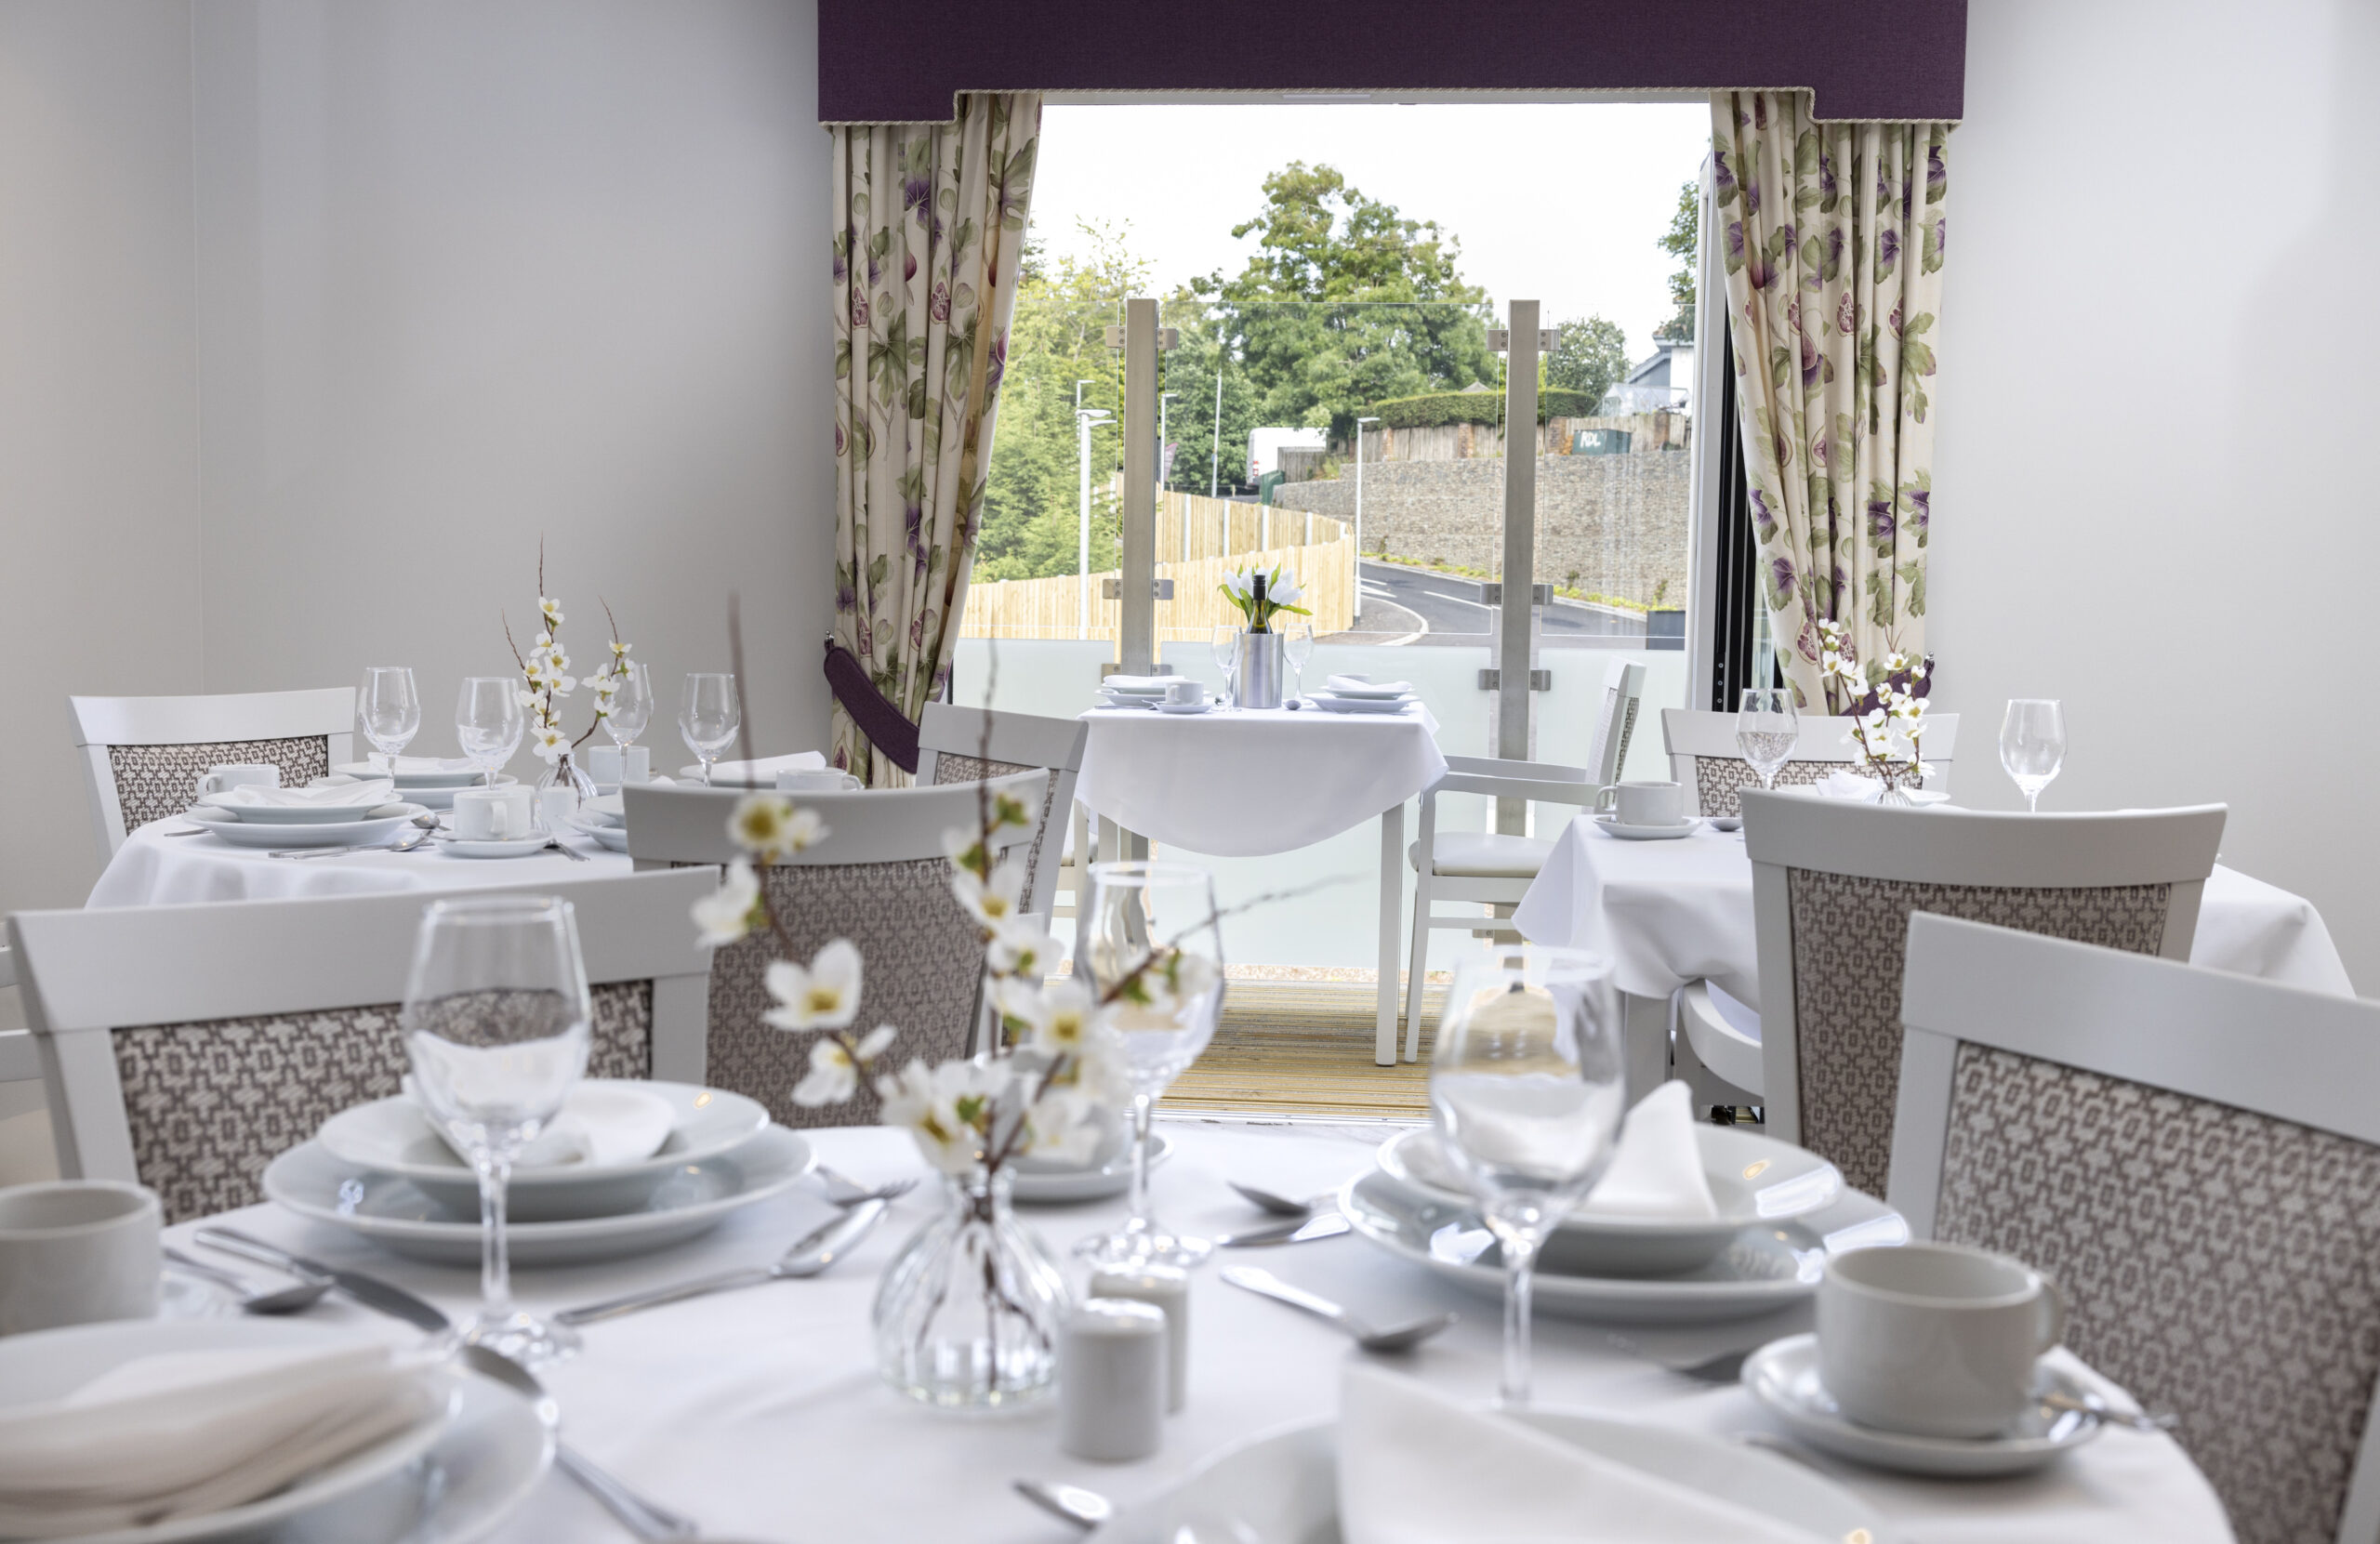 Dining Room at Mearns View Care Home